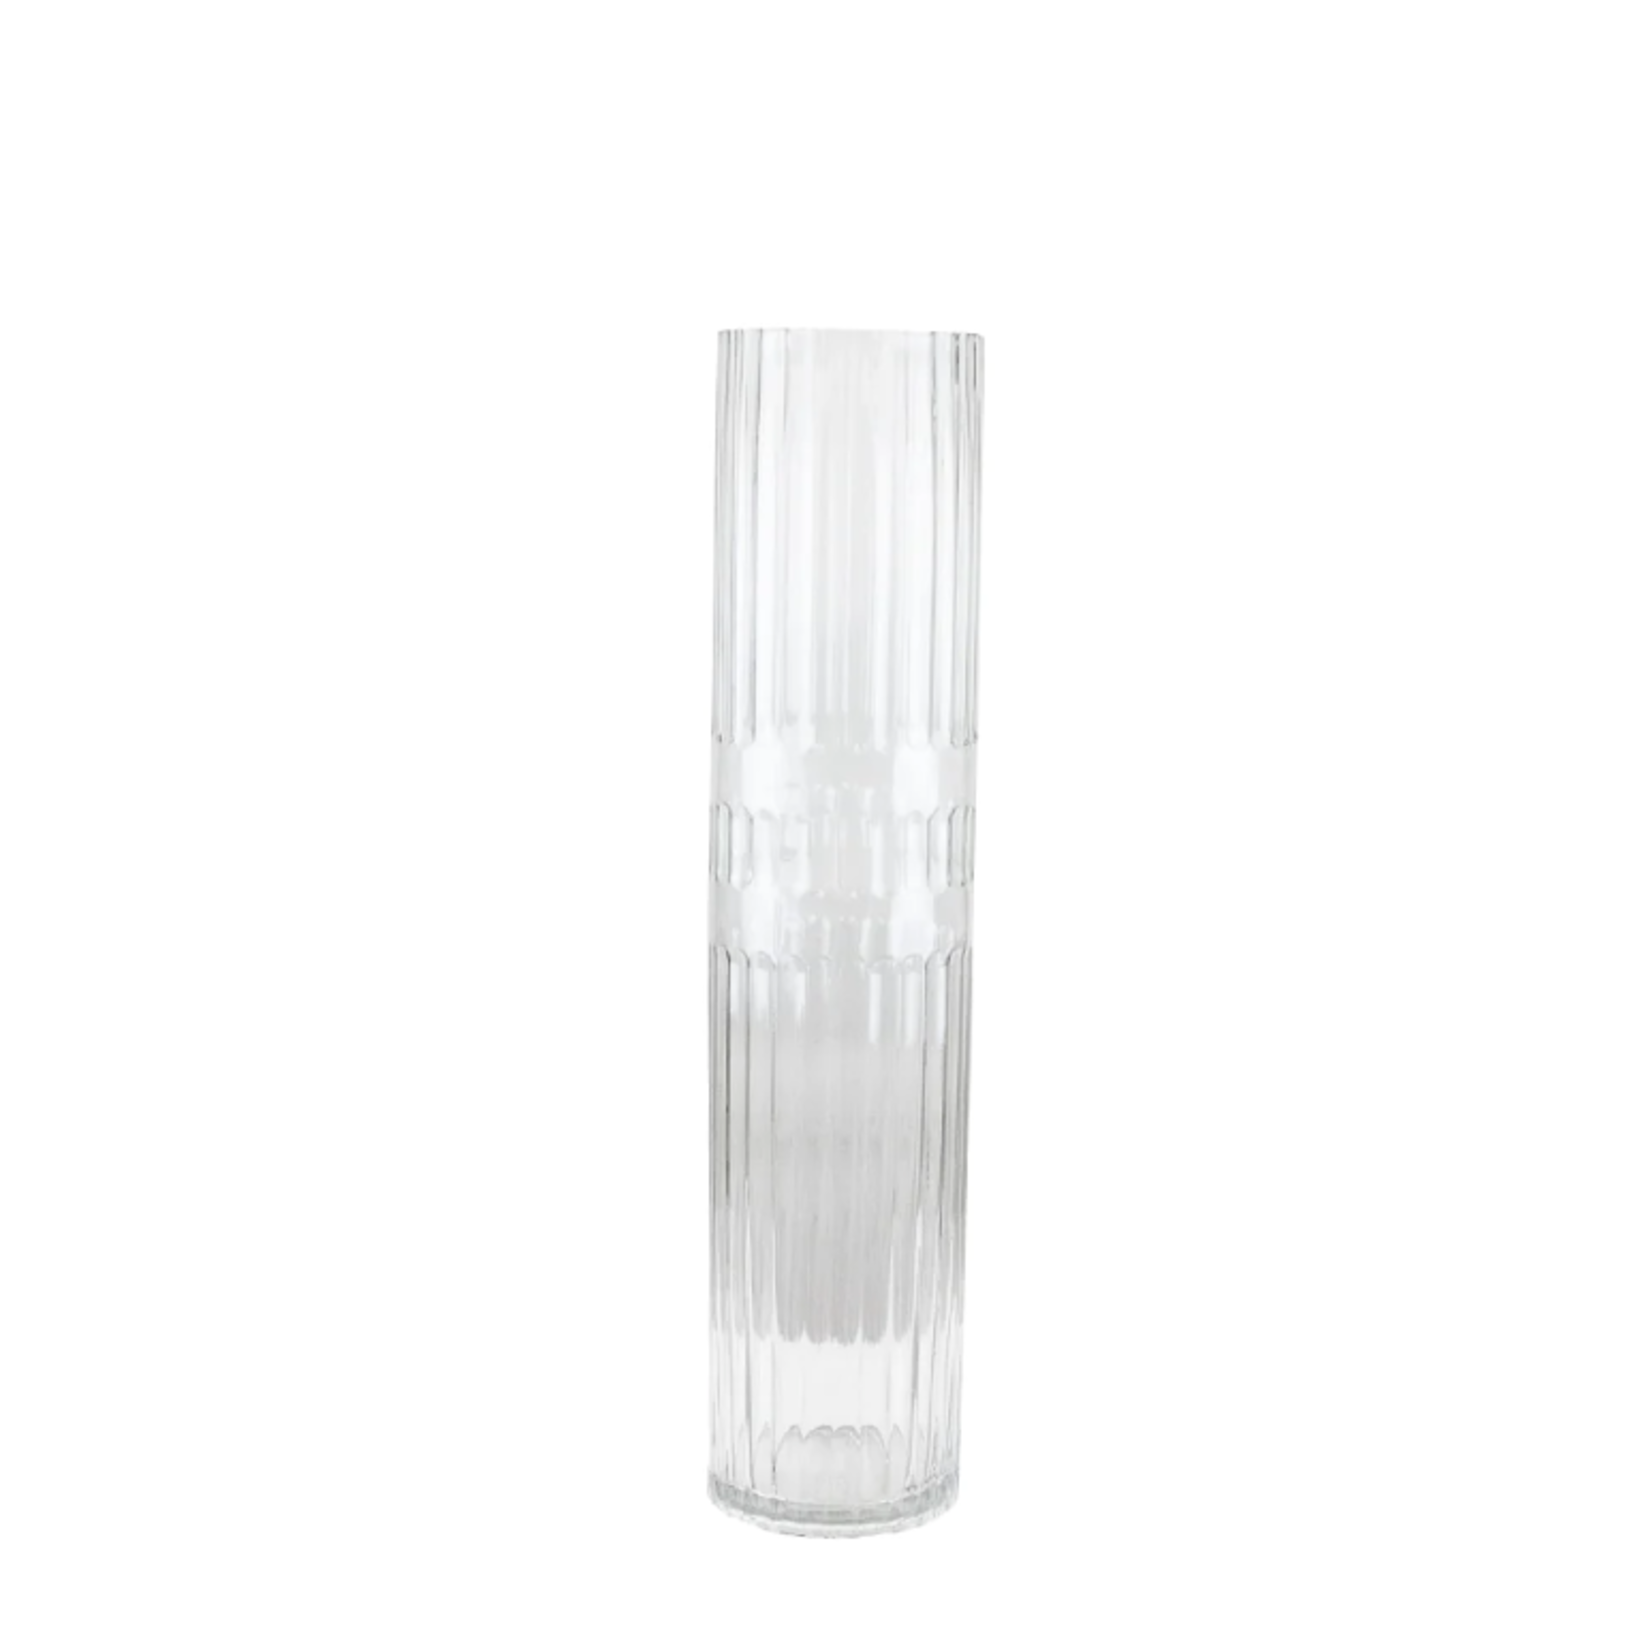 22”H X 5” CLEAR GLASS FLUTED LAYLA VASE